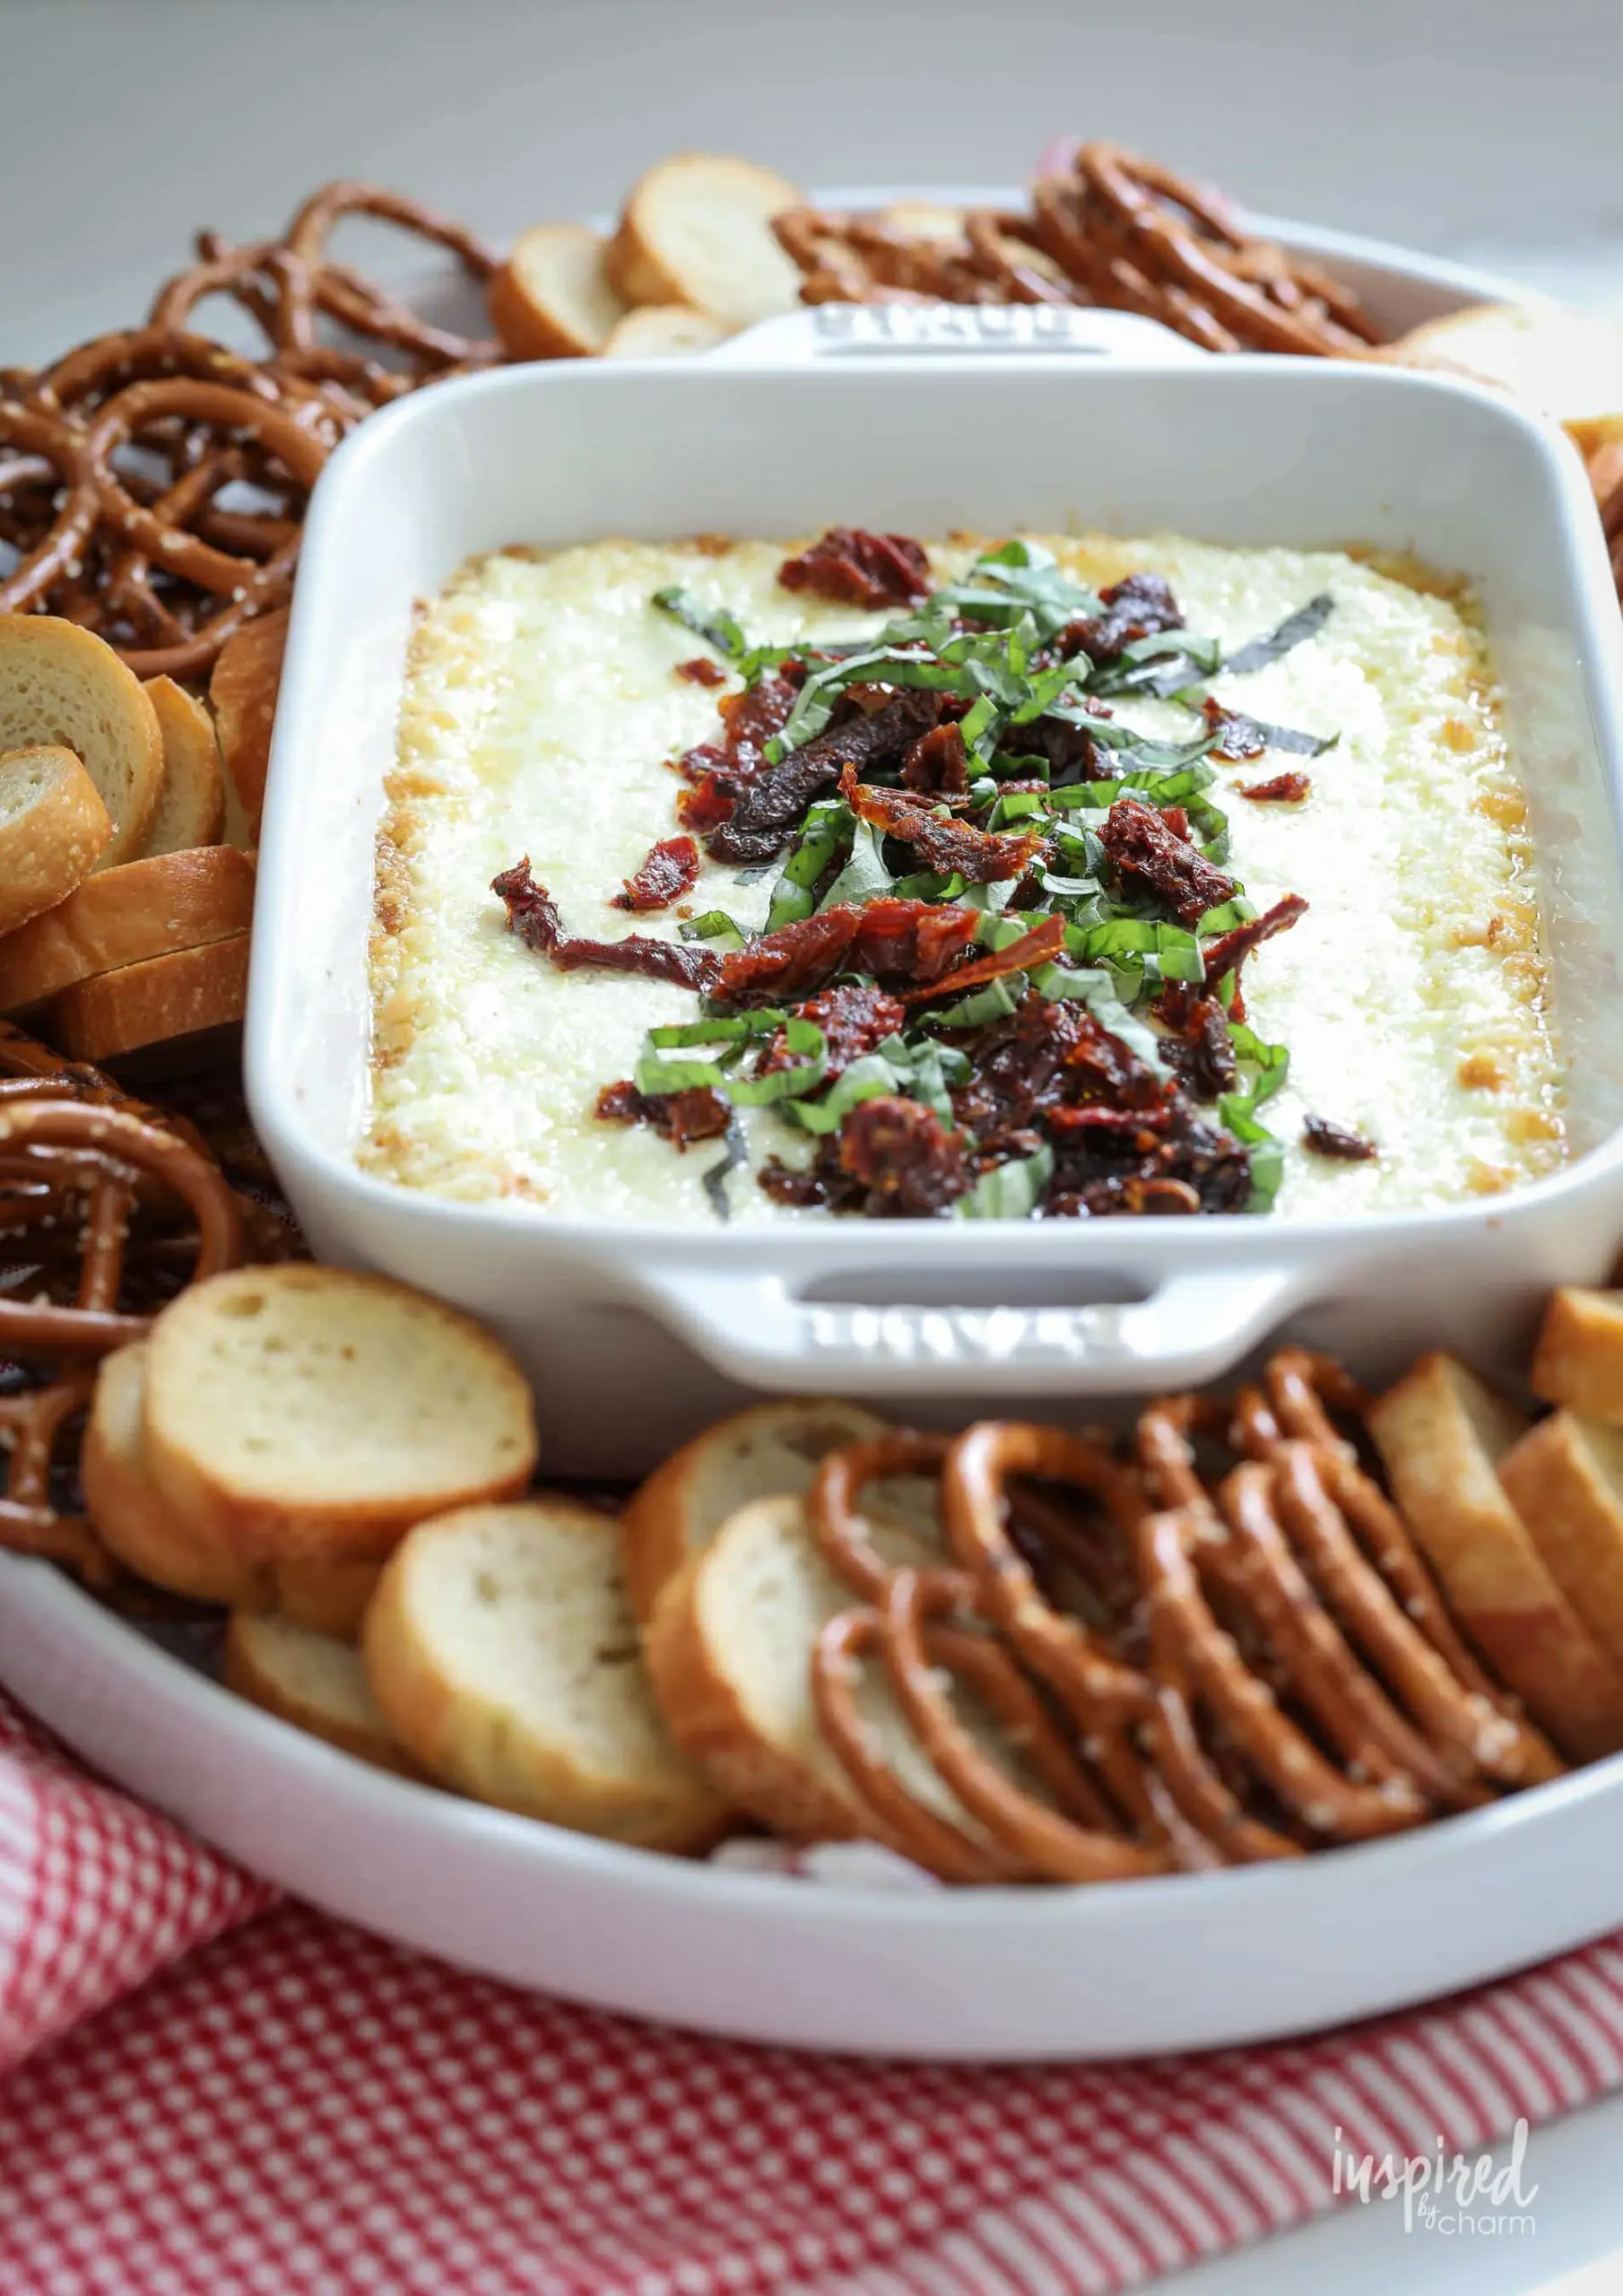 Warm Goat Cheese Dip with Sun